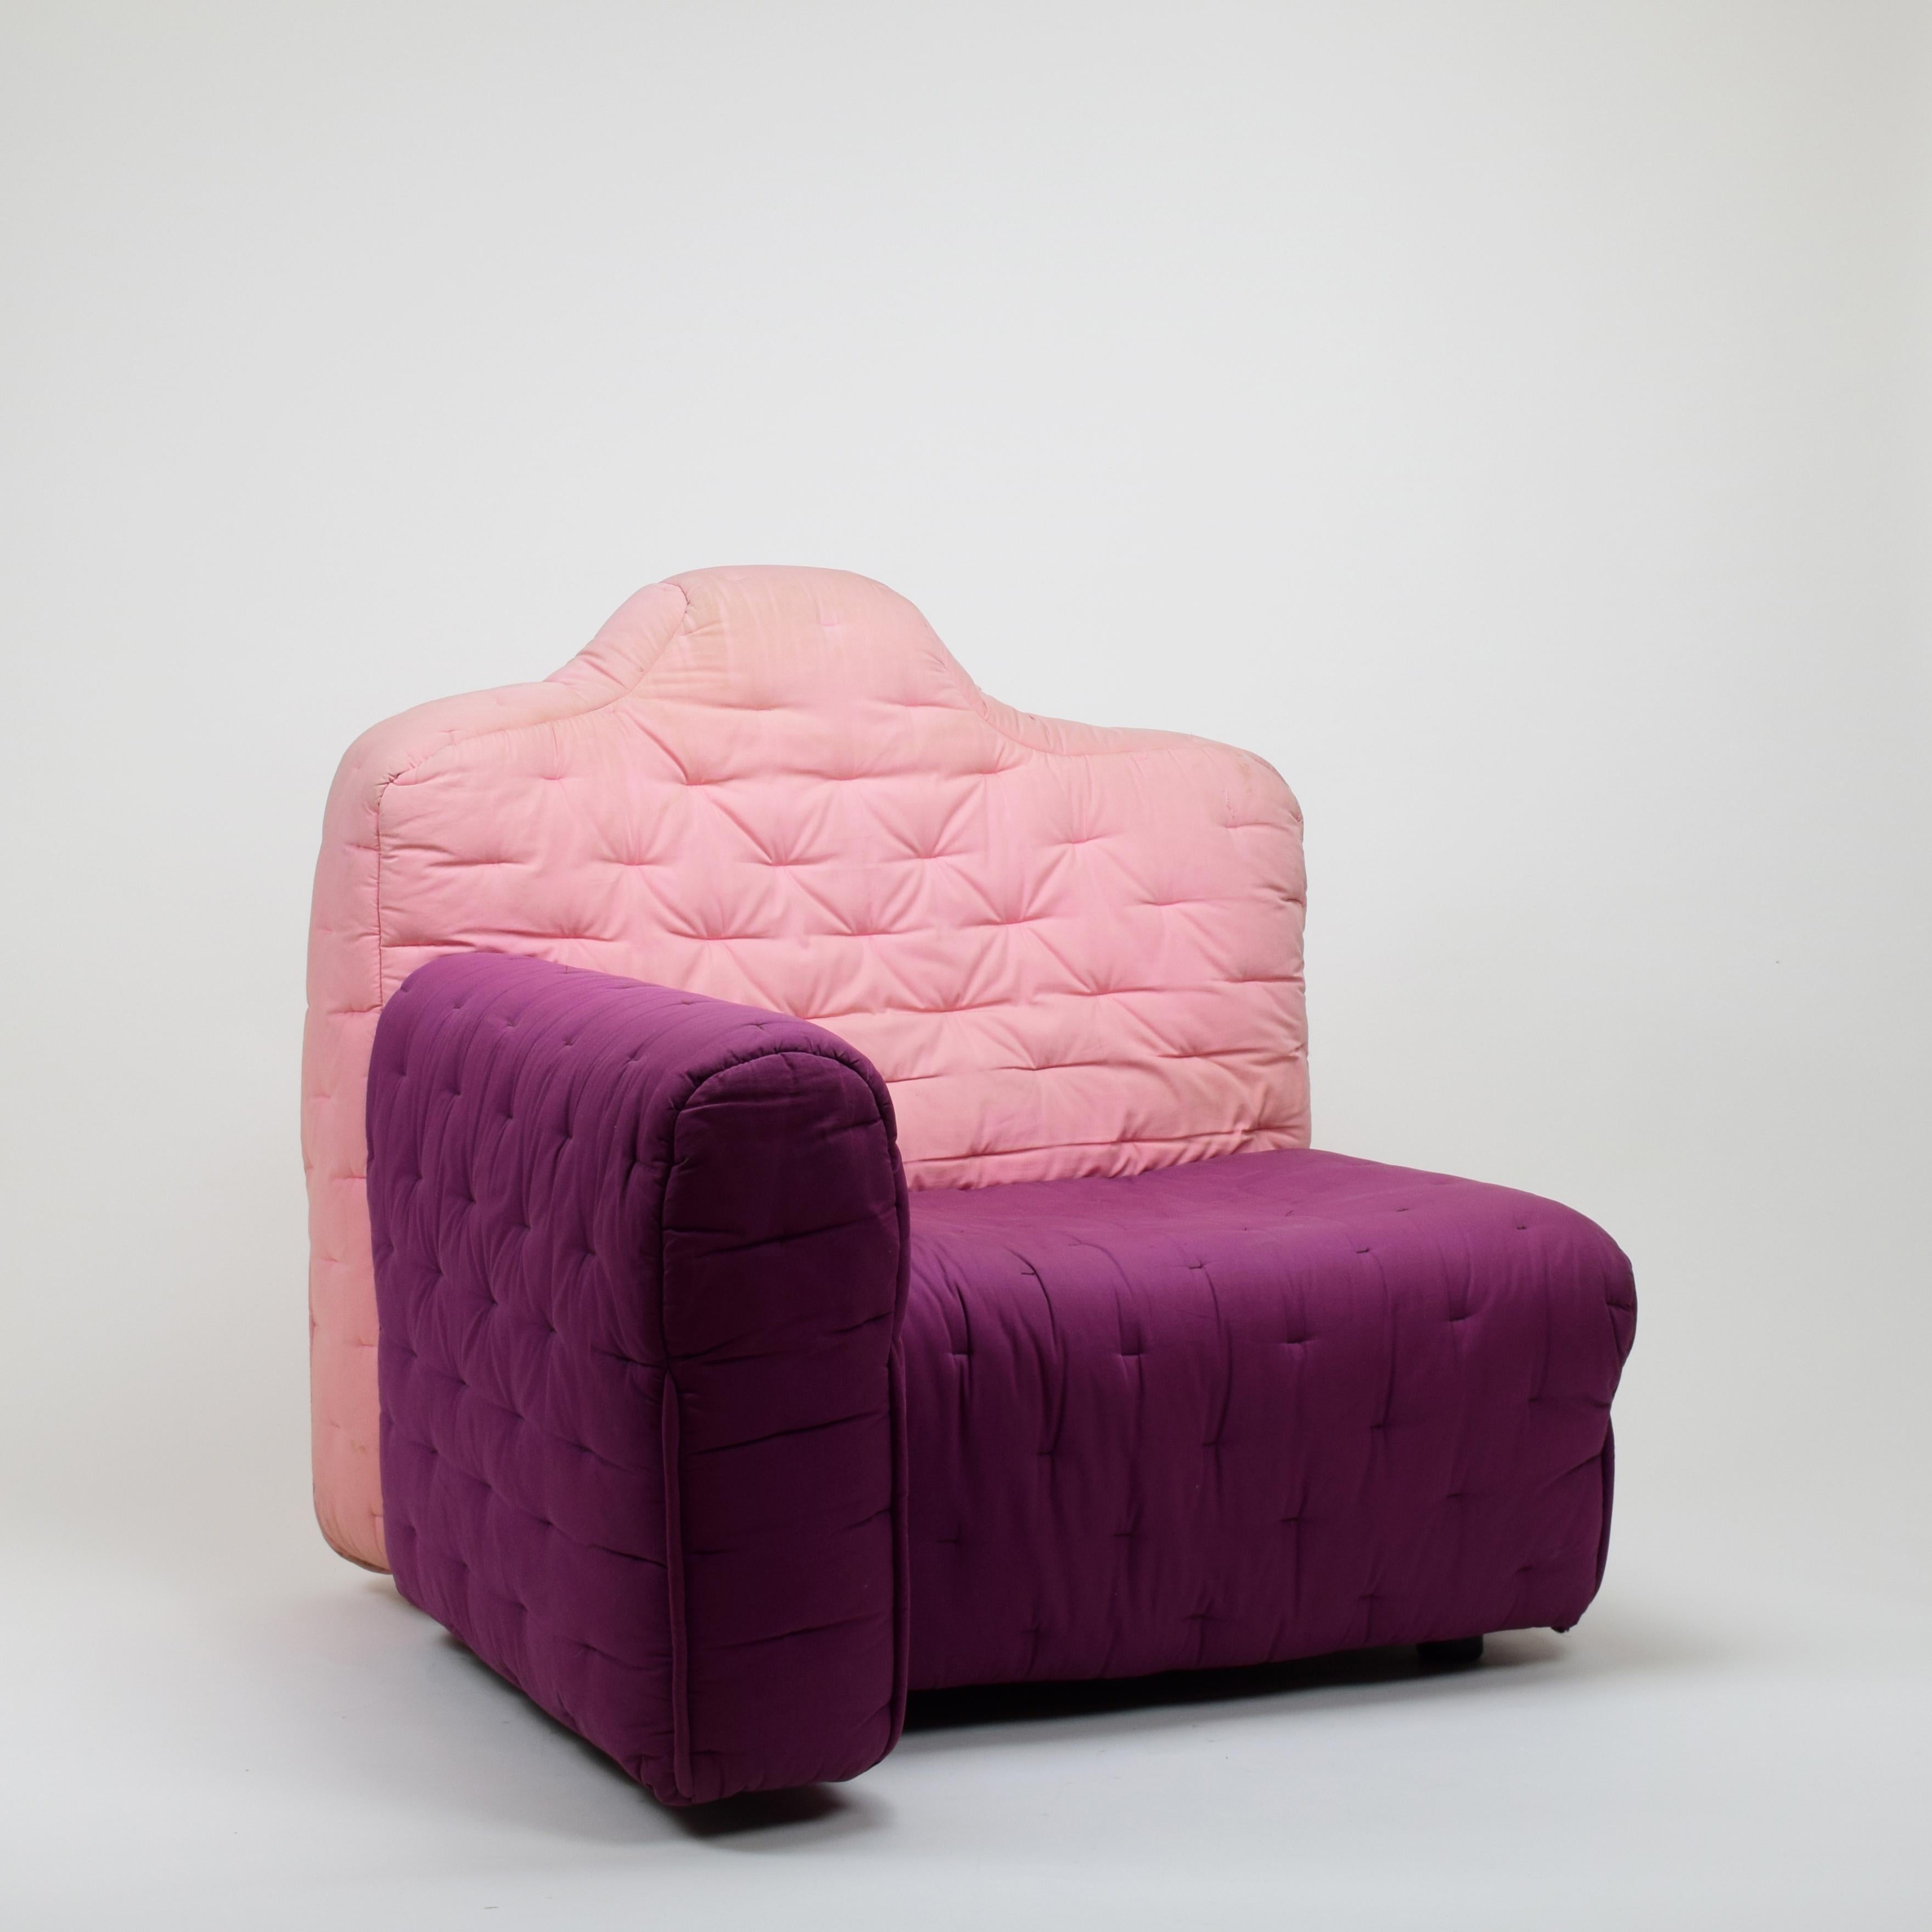 Fabric Gaetano Pesce, 'Cannaregio' Armchair, Cassina Italy 1987, Large Pink and Purple For Sale